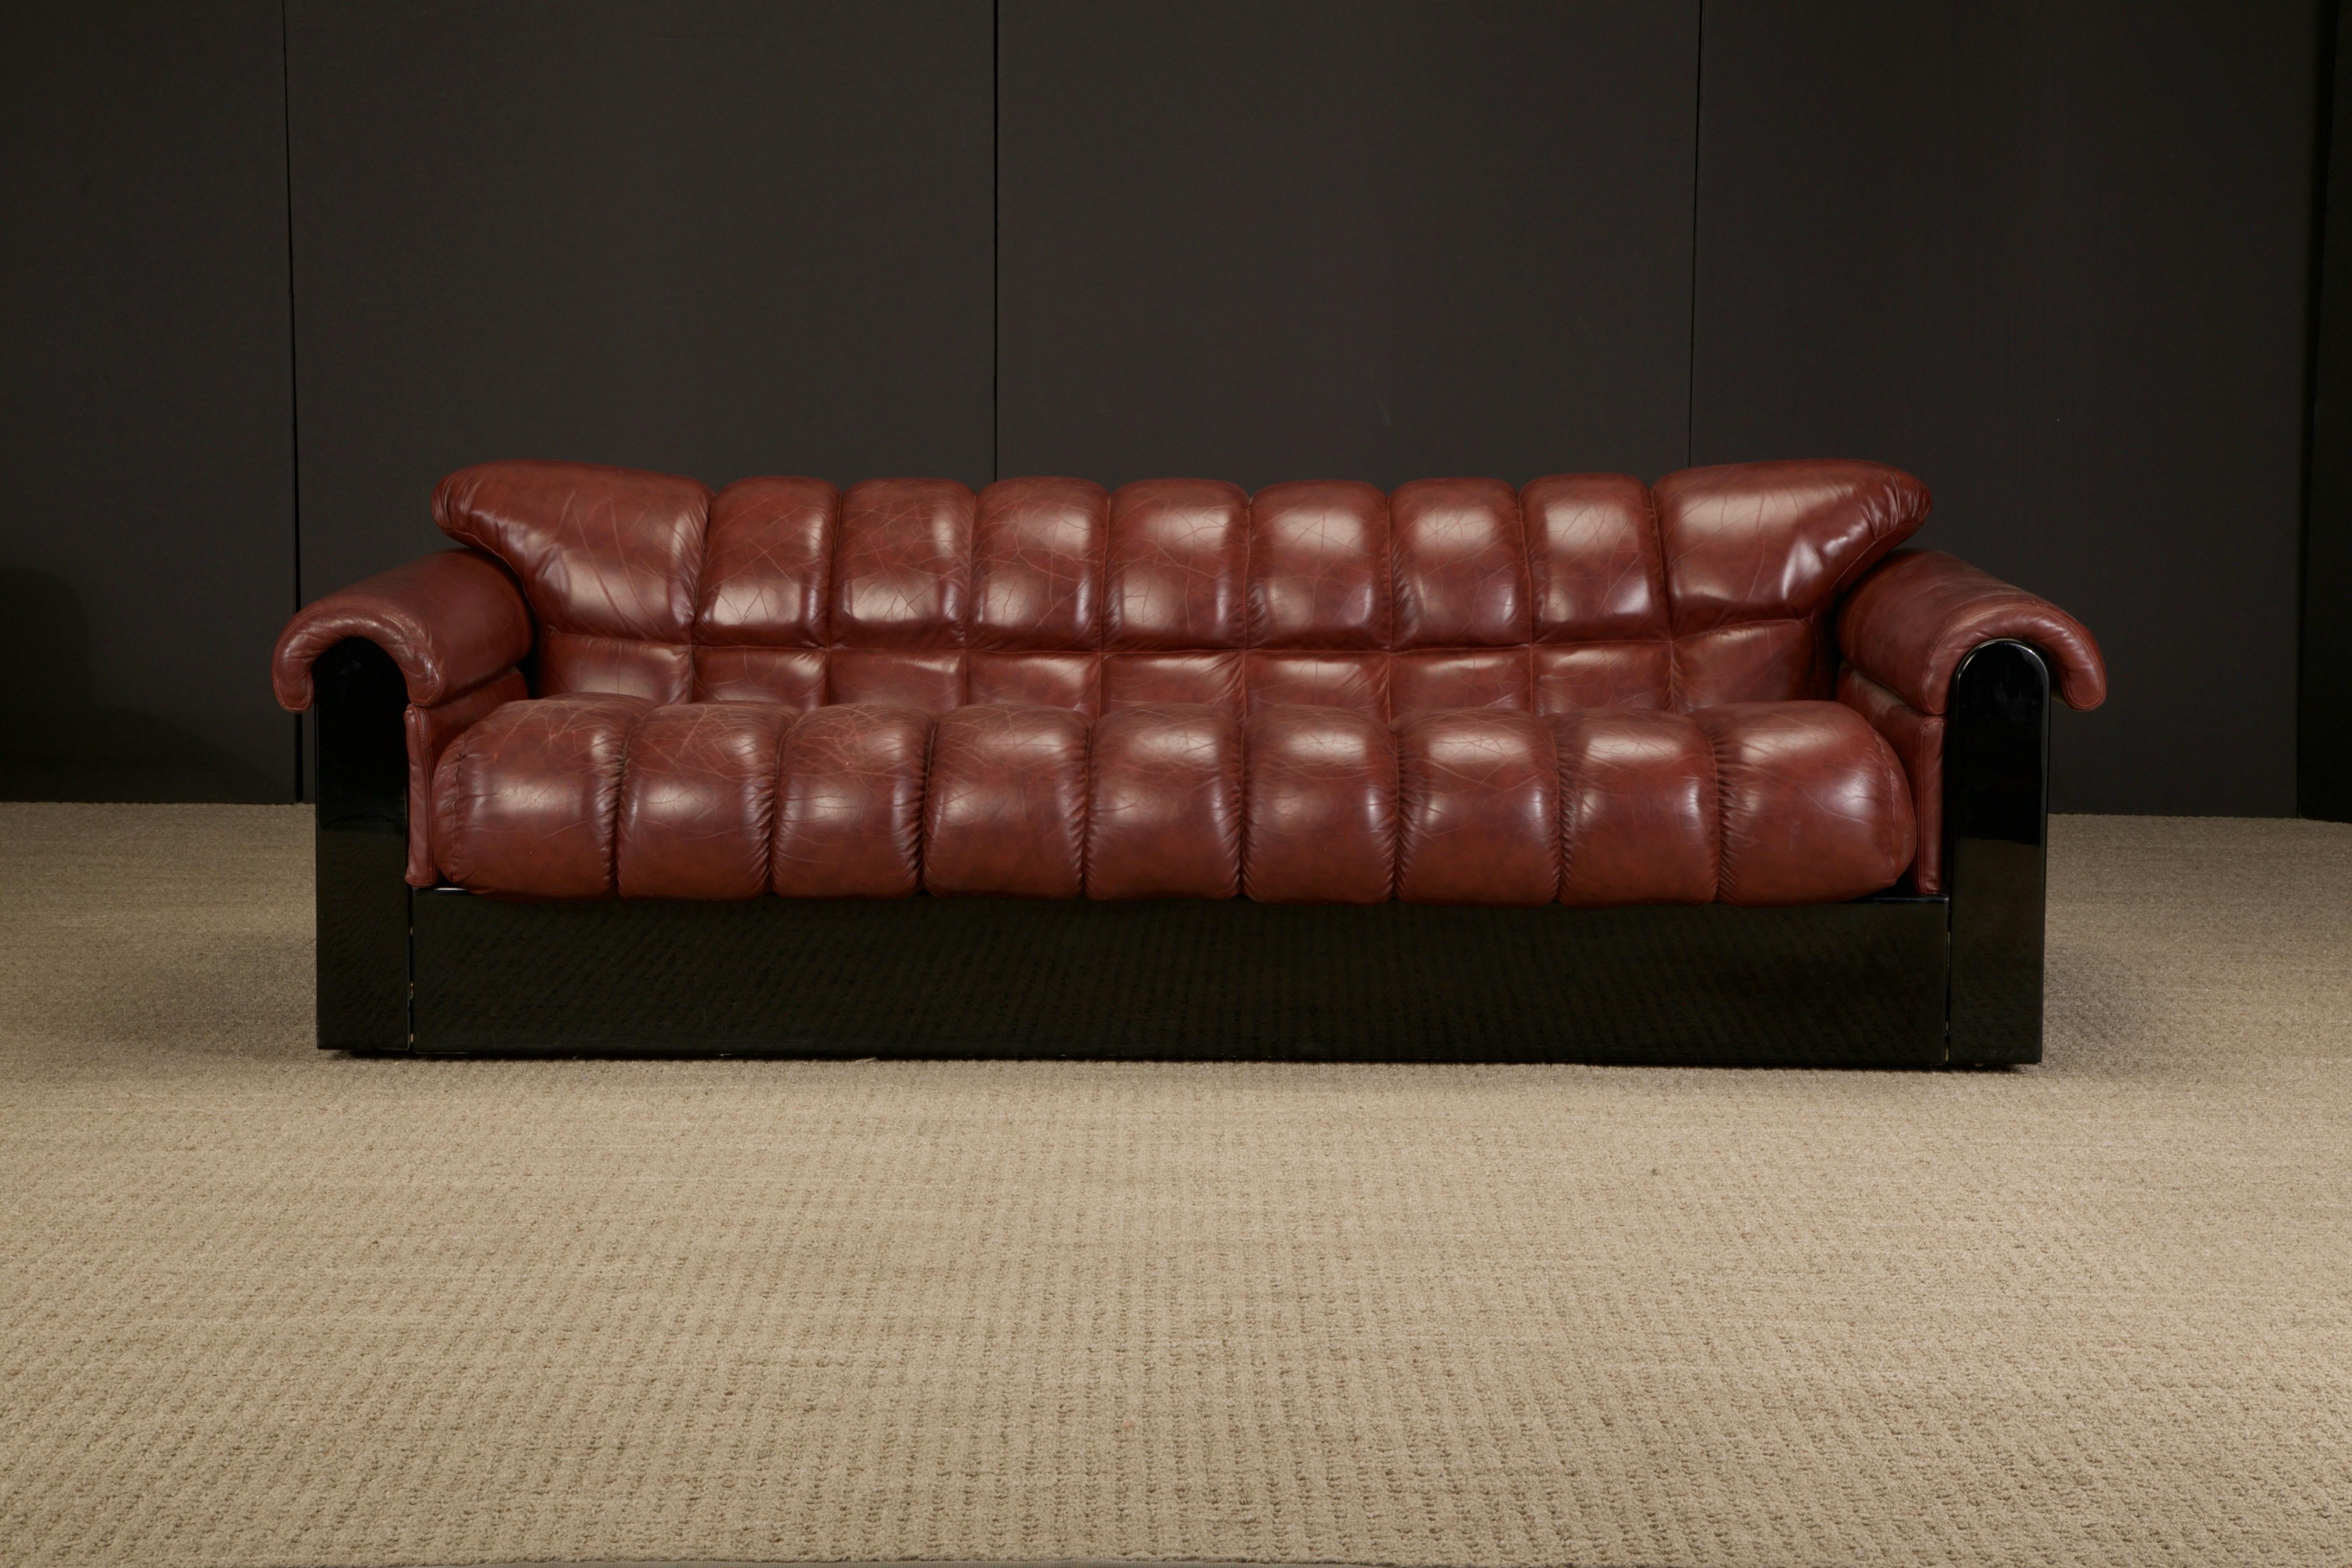 A lovely example of the 'Bounty' series three-seat sofa by The Pace Collection in the early 1980s, this deep seated channel-tufted leather sofa was designed by L. Davantazi produced by Elam and retailed by The Pace Collection. Perfect for a cigar,